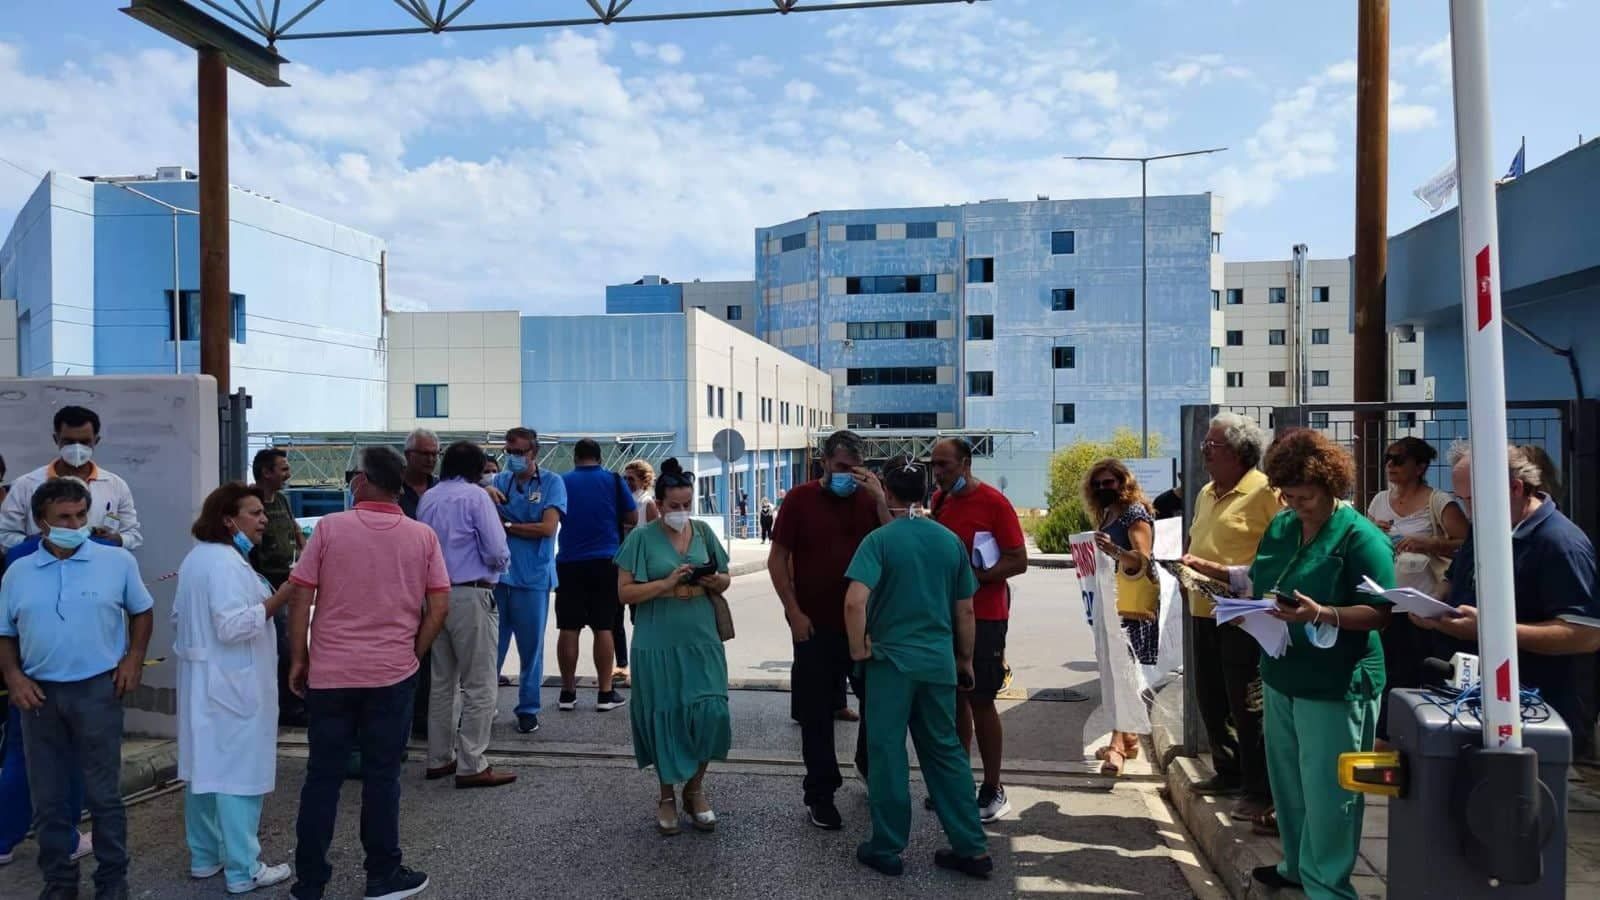 Corfu Hospital employees work stoppage and protest